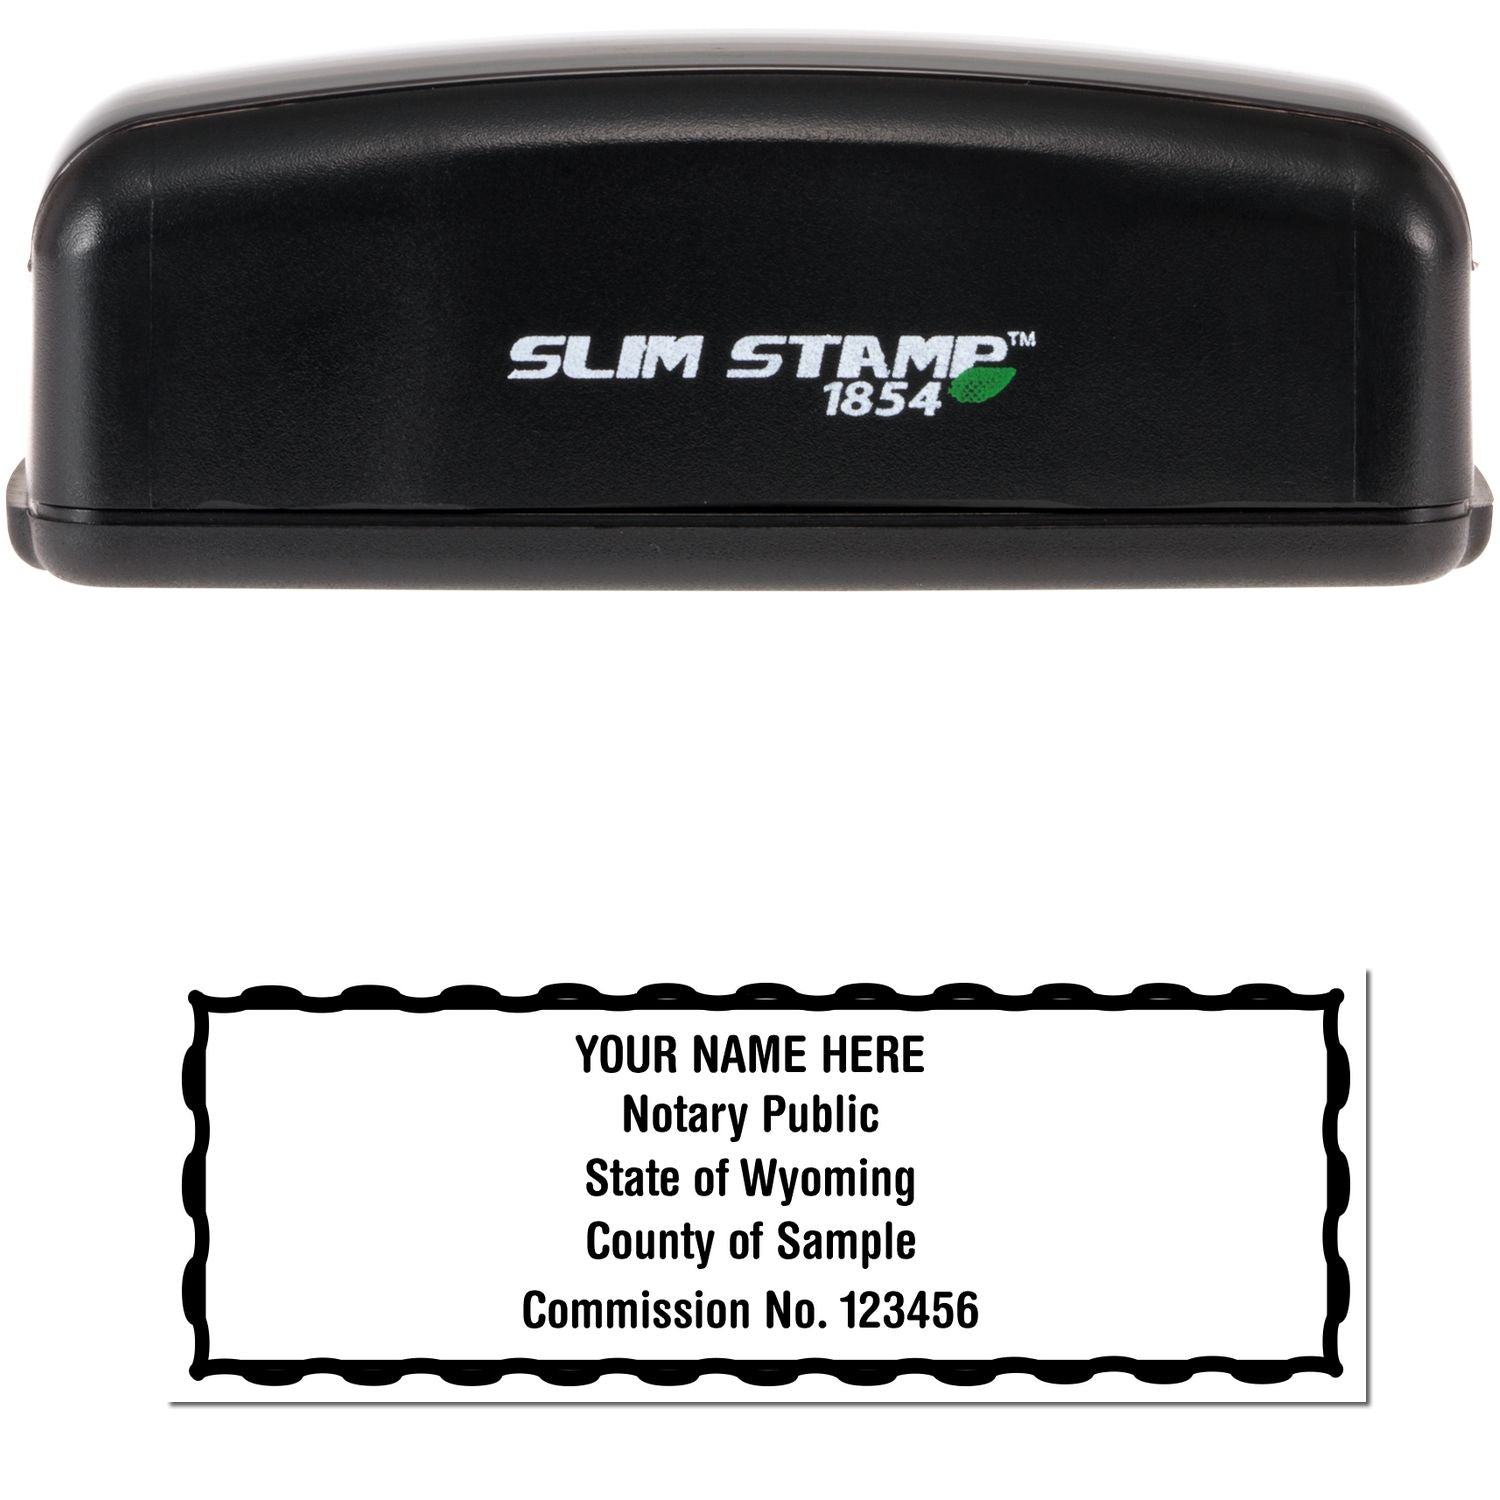 The main image for the Slim Pre-Inked Rectangular Notary Stamp for Wyoming depicting a sample of the imprint and electronic files